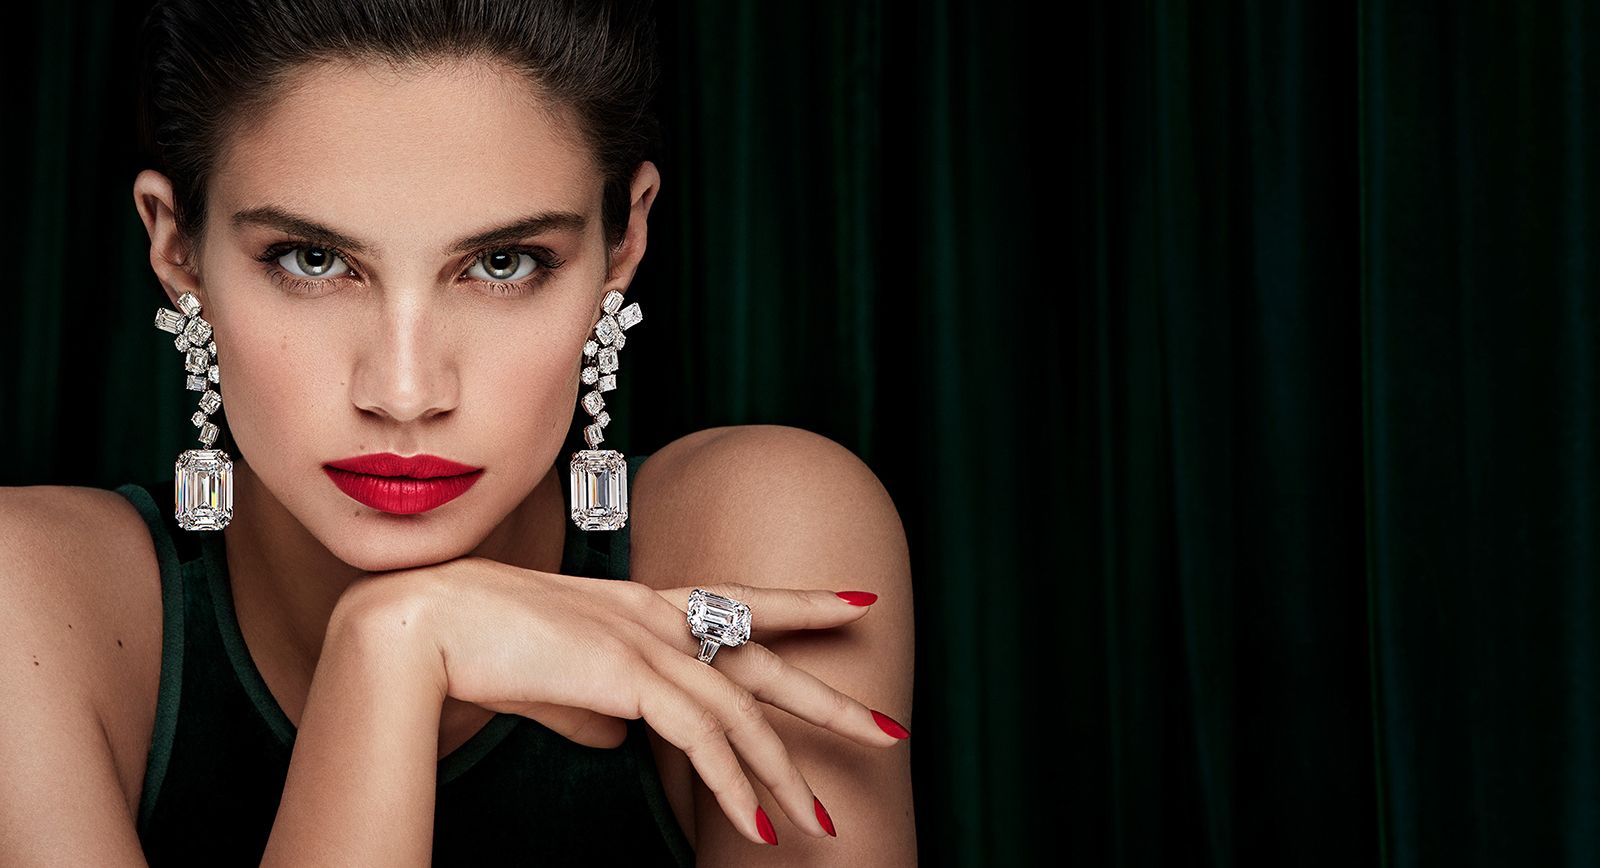 Graff's Epic New High Jewelry Collection Is the Biggest in Its History